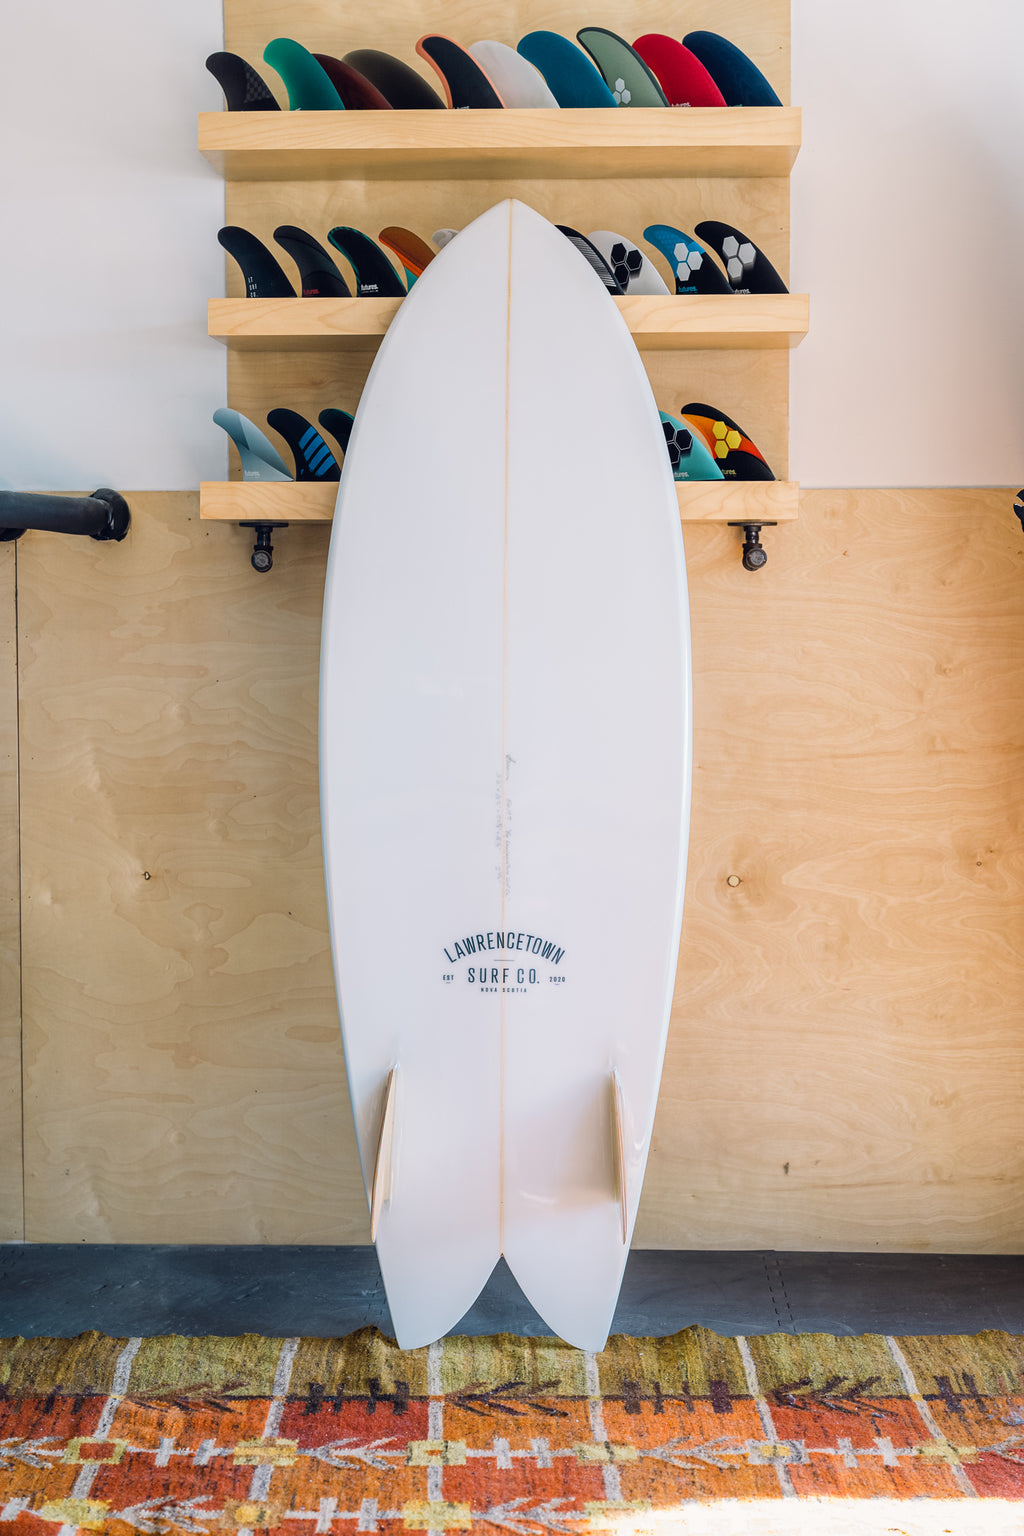 Lawrencetown Surf Co. - 5'6" Keel Fish